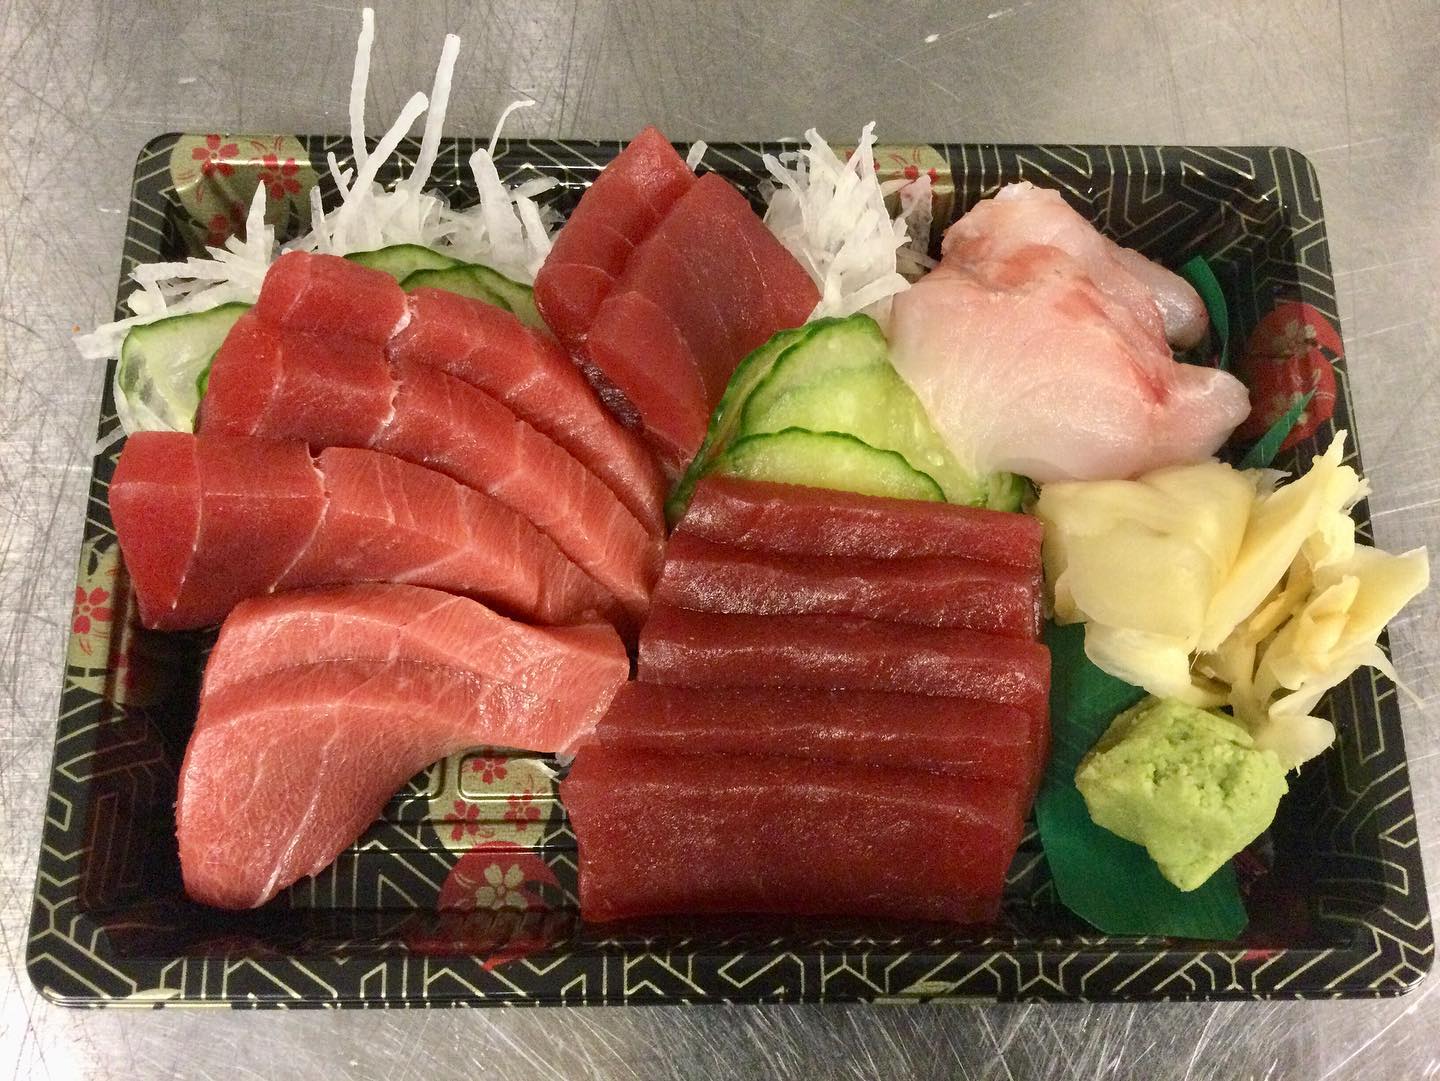 Many slices of sashmi are arranged in a paper rectangular container with thinly sliced cucumbers in the middle. Photo by Ken Ishibashi.